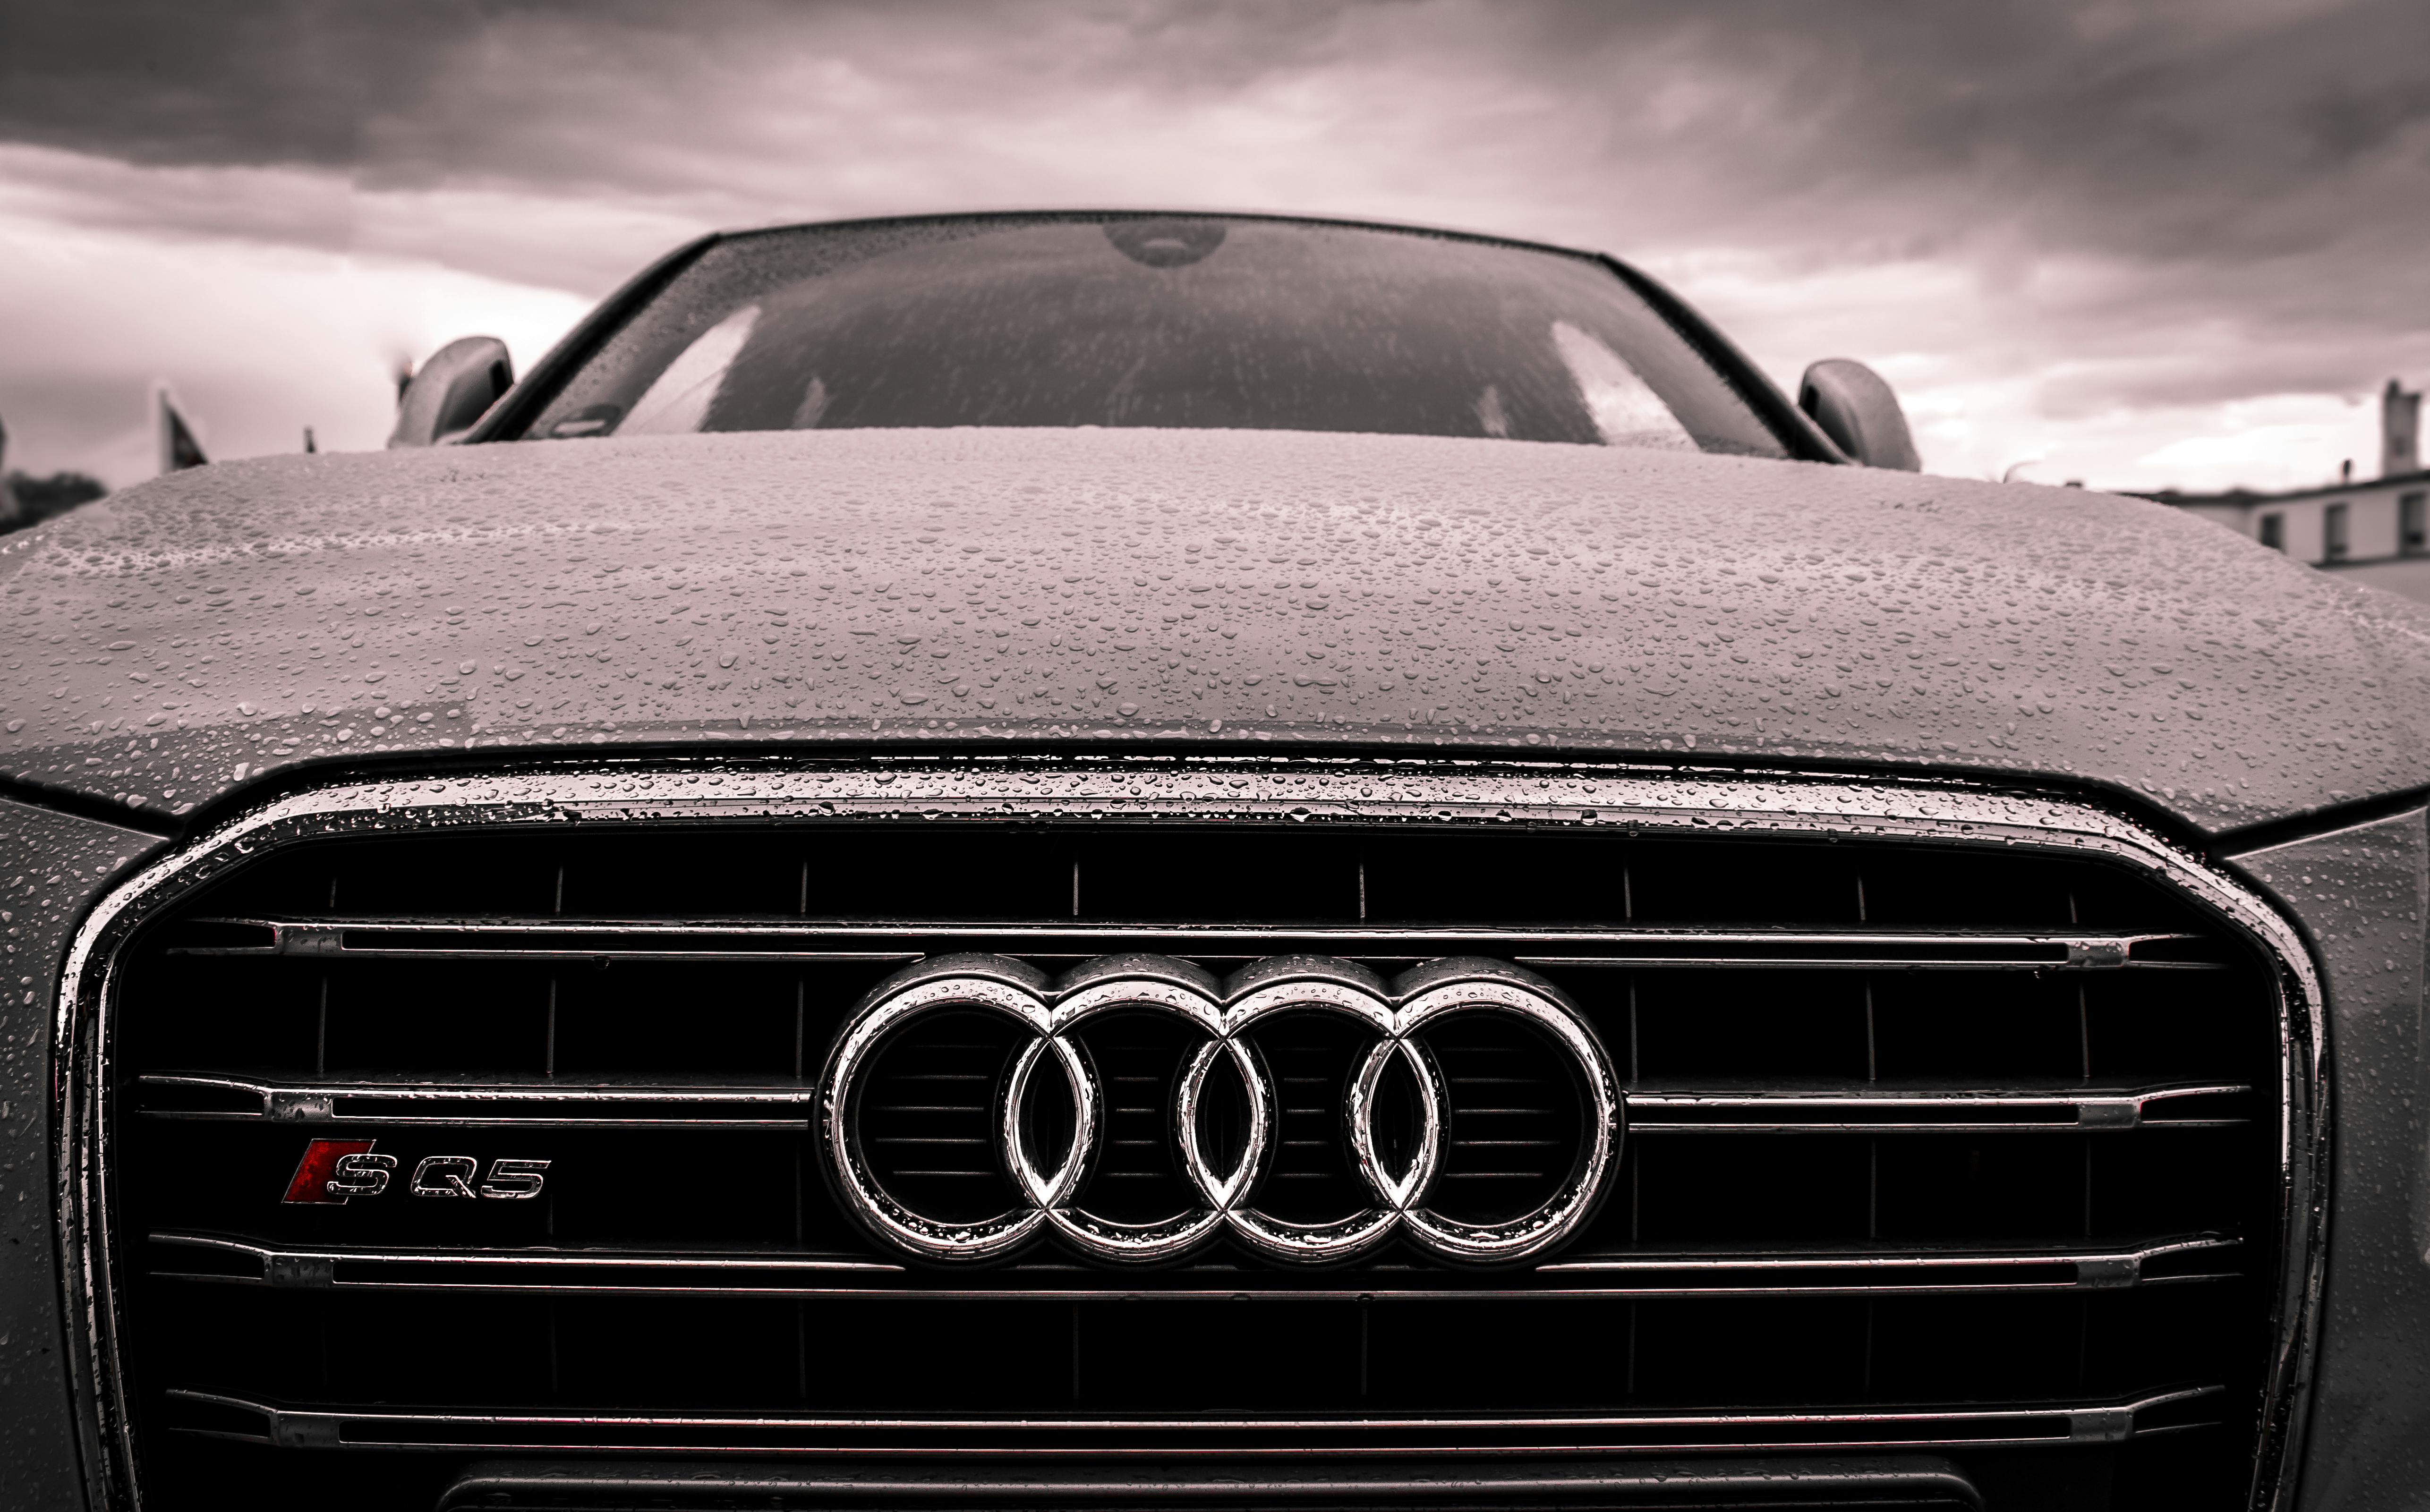 Audi Photos, Download The BEST Free Audi Stock Photos & HD Images